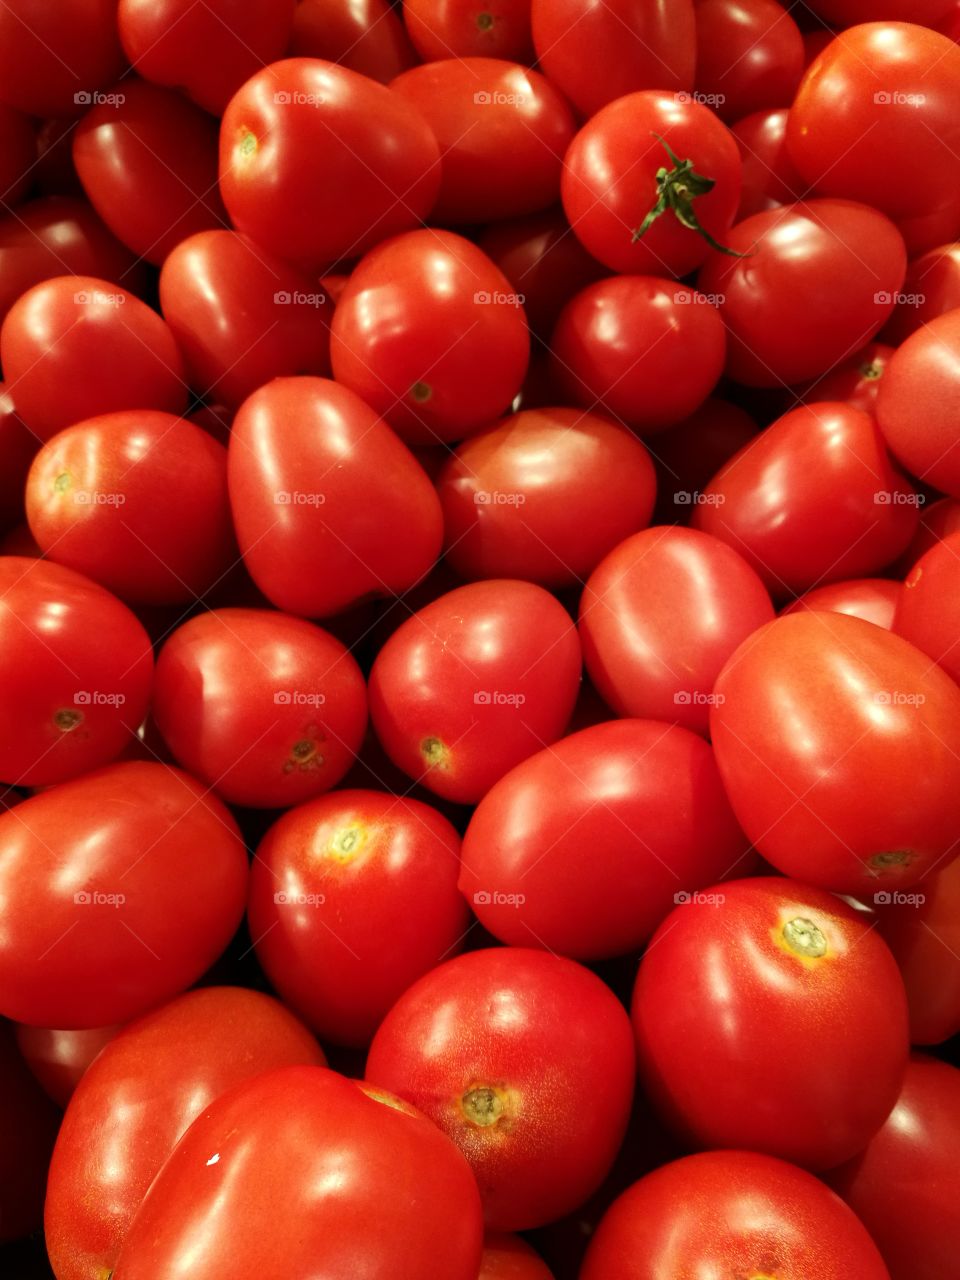 Closeup of red tomatoes